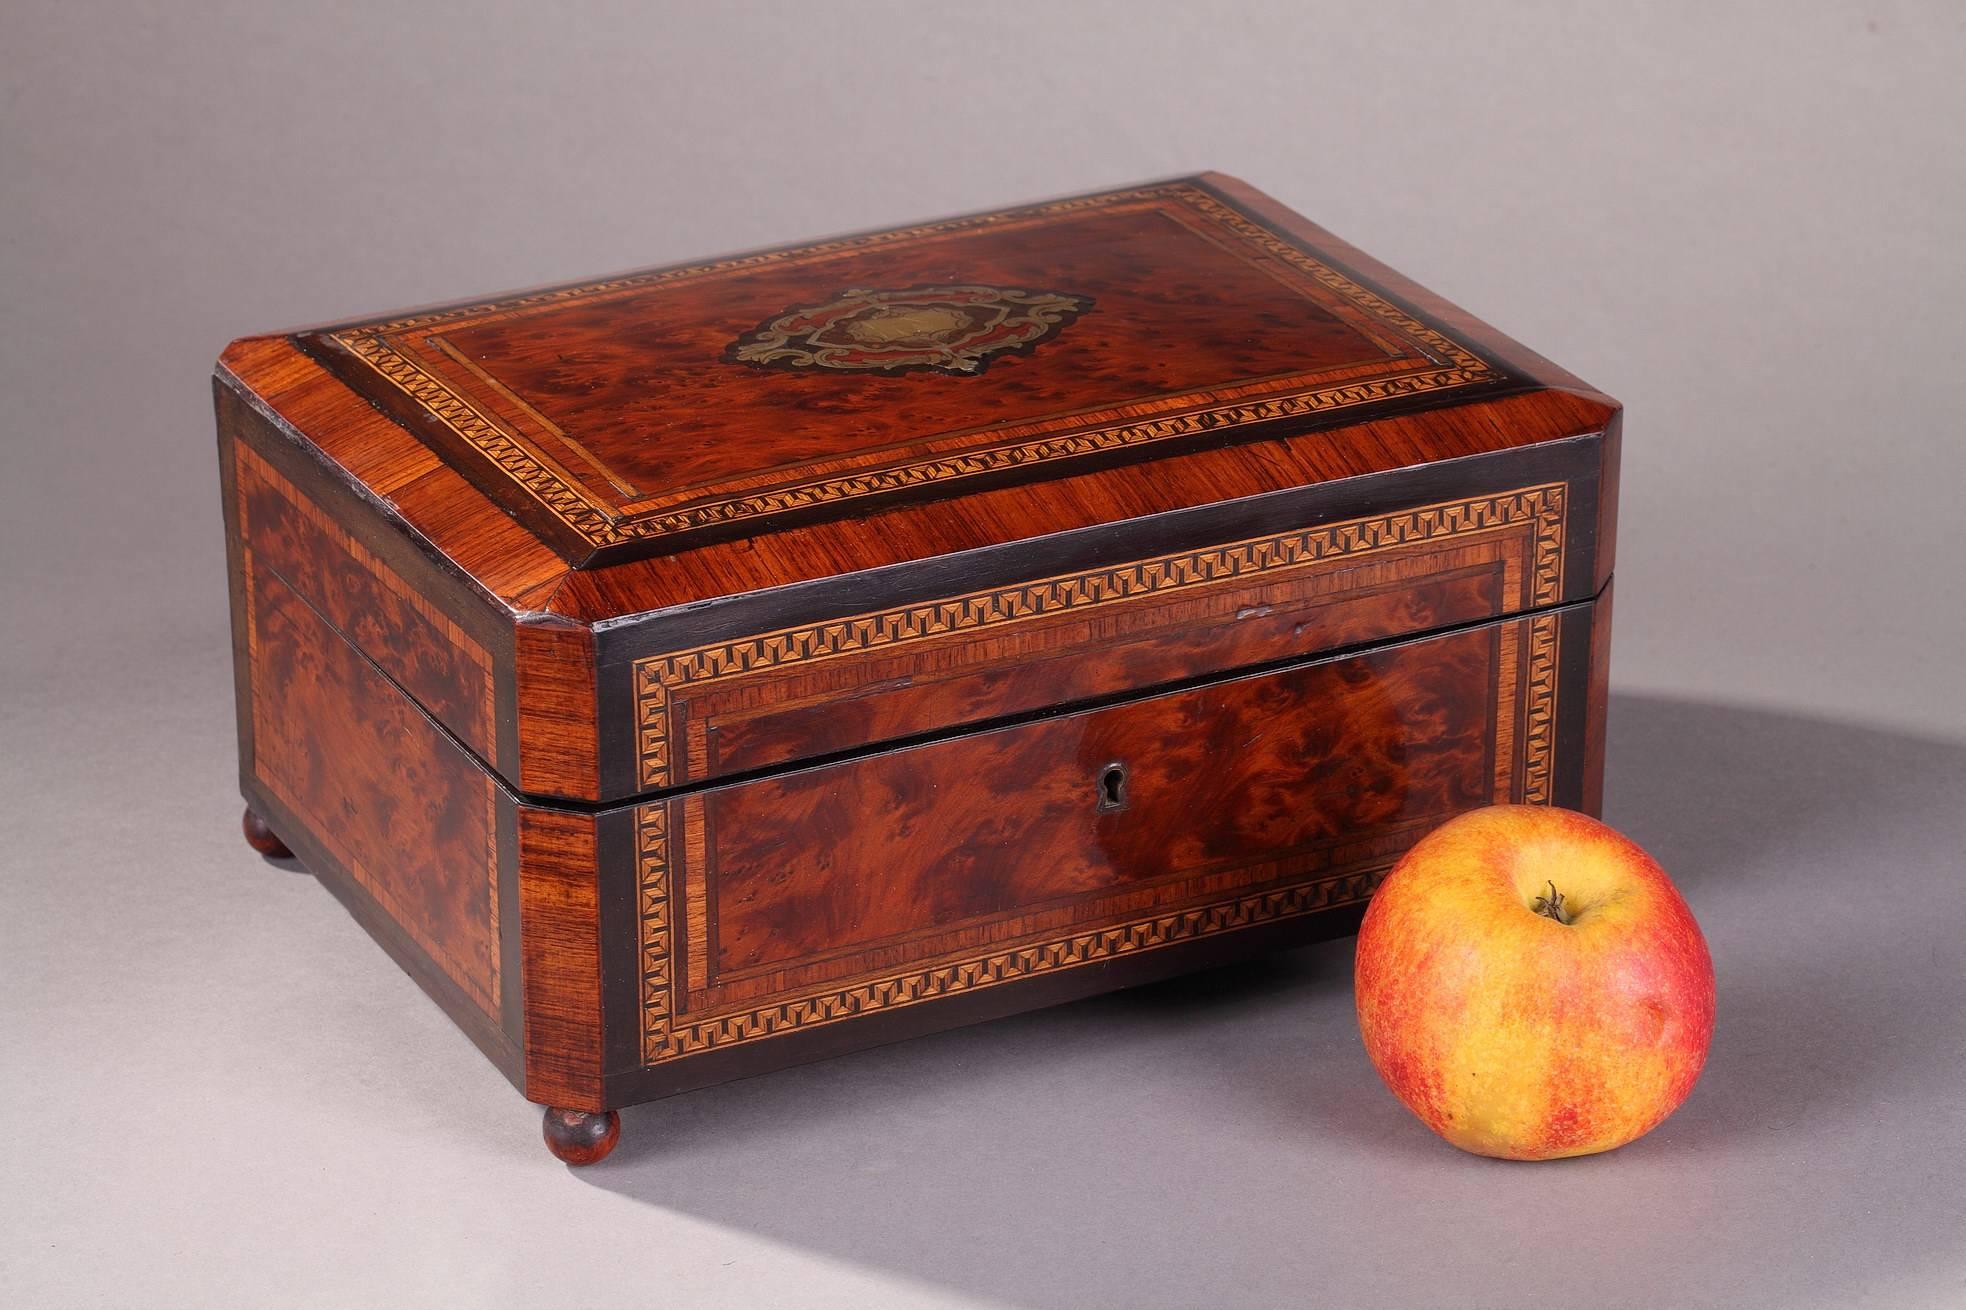 Varnished, burl wood sewing box, decorated with Greek frieze and brass inlays. The box contains a mirror and sewing utensils made of bone and brass, as well as two small glass flasks. The tray of sewing tools can be removed to reveal the double